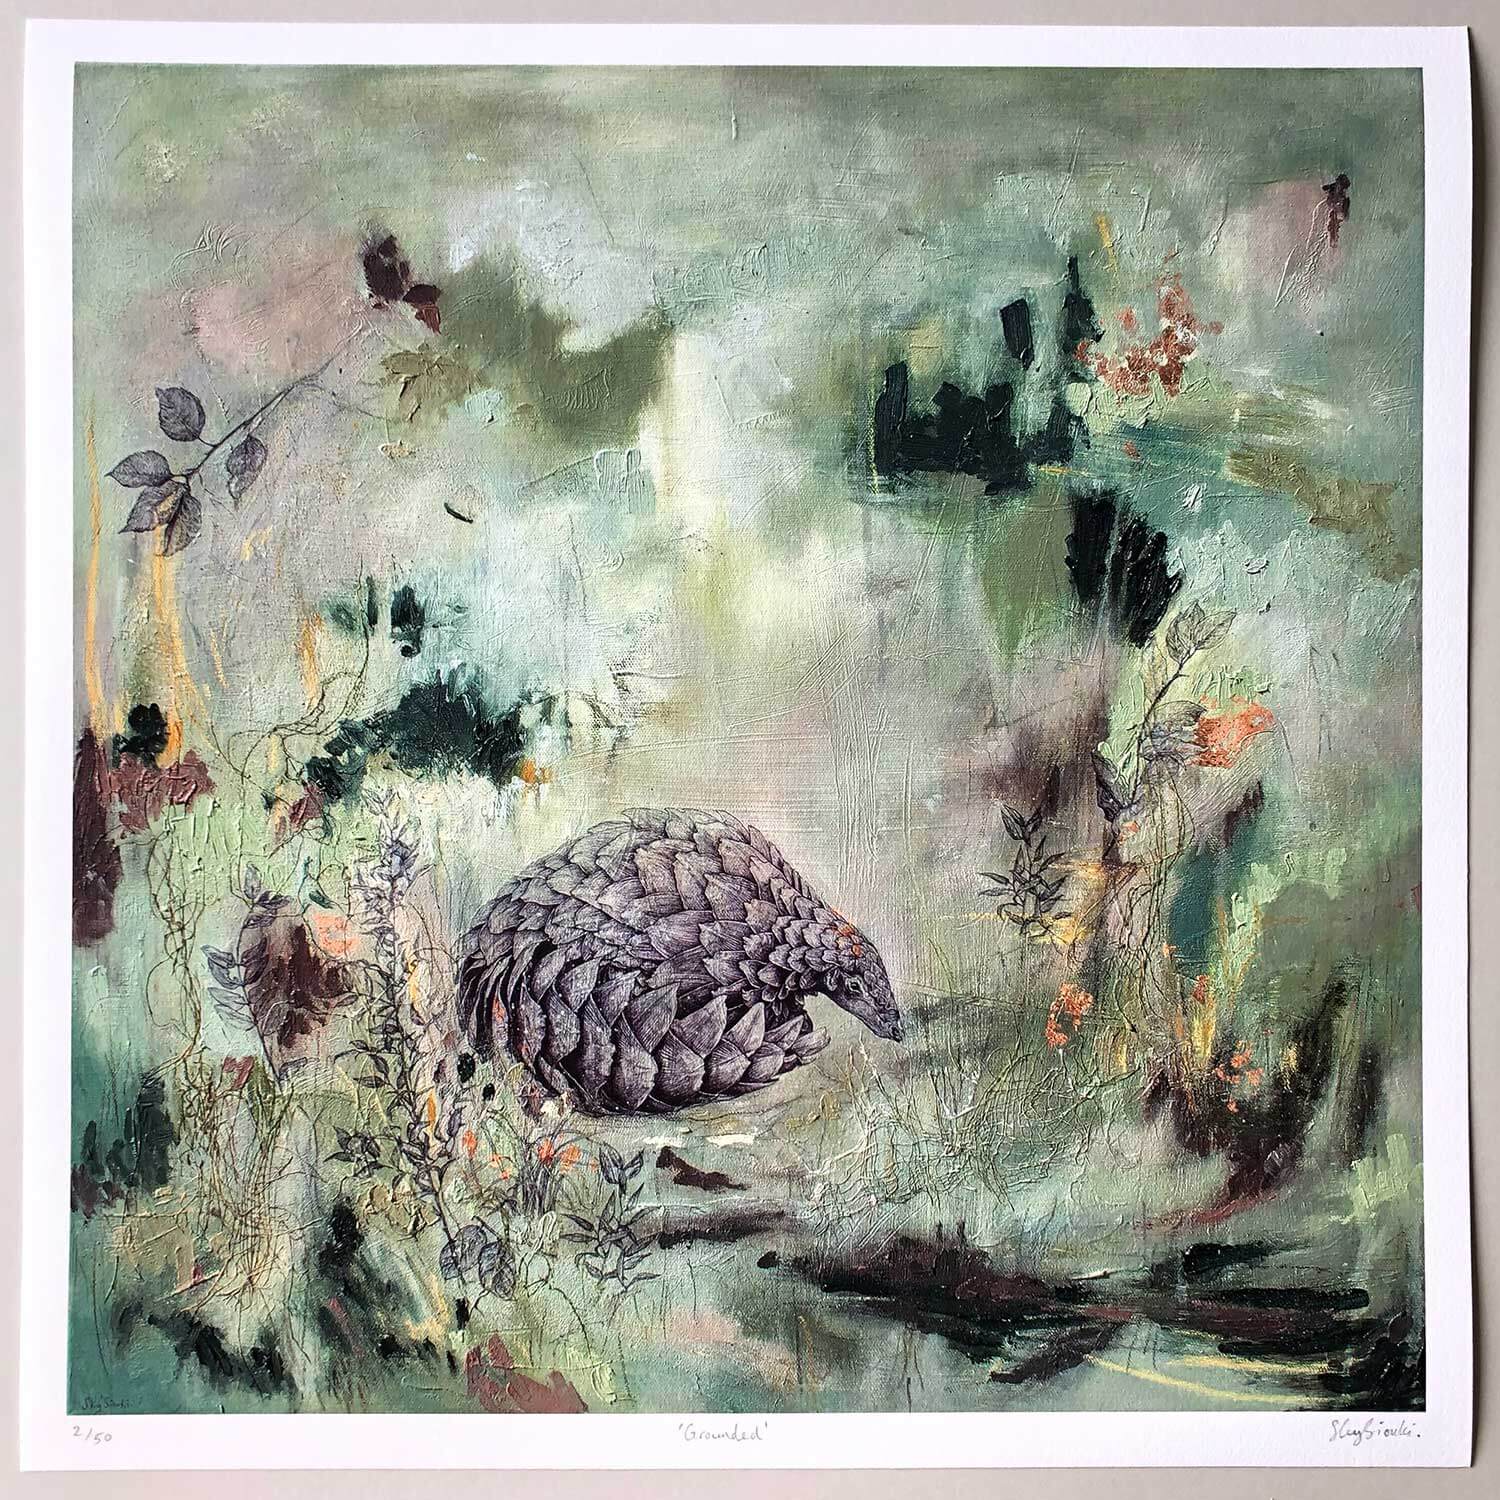 sky siouki Grounded – Pangolin Limited Edition Giclee Print